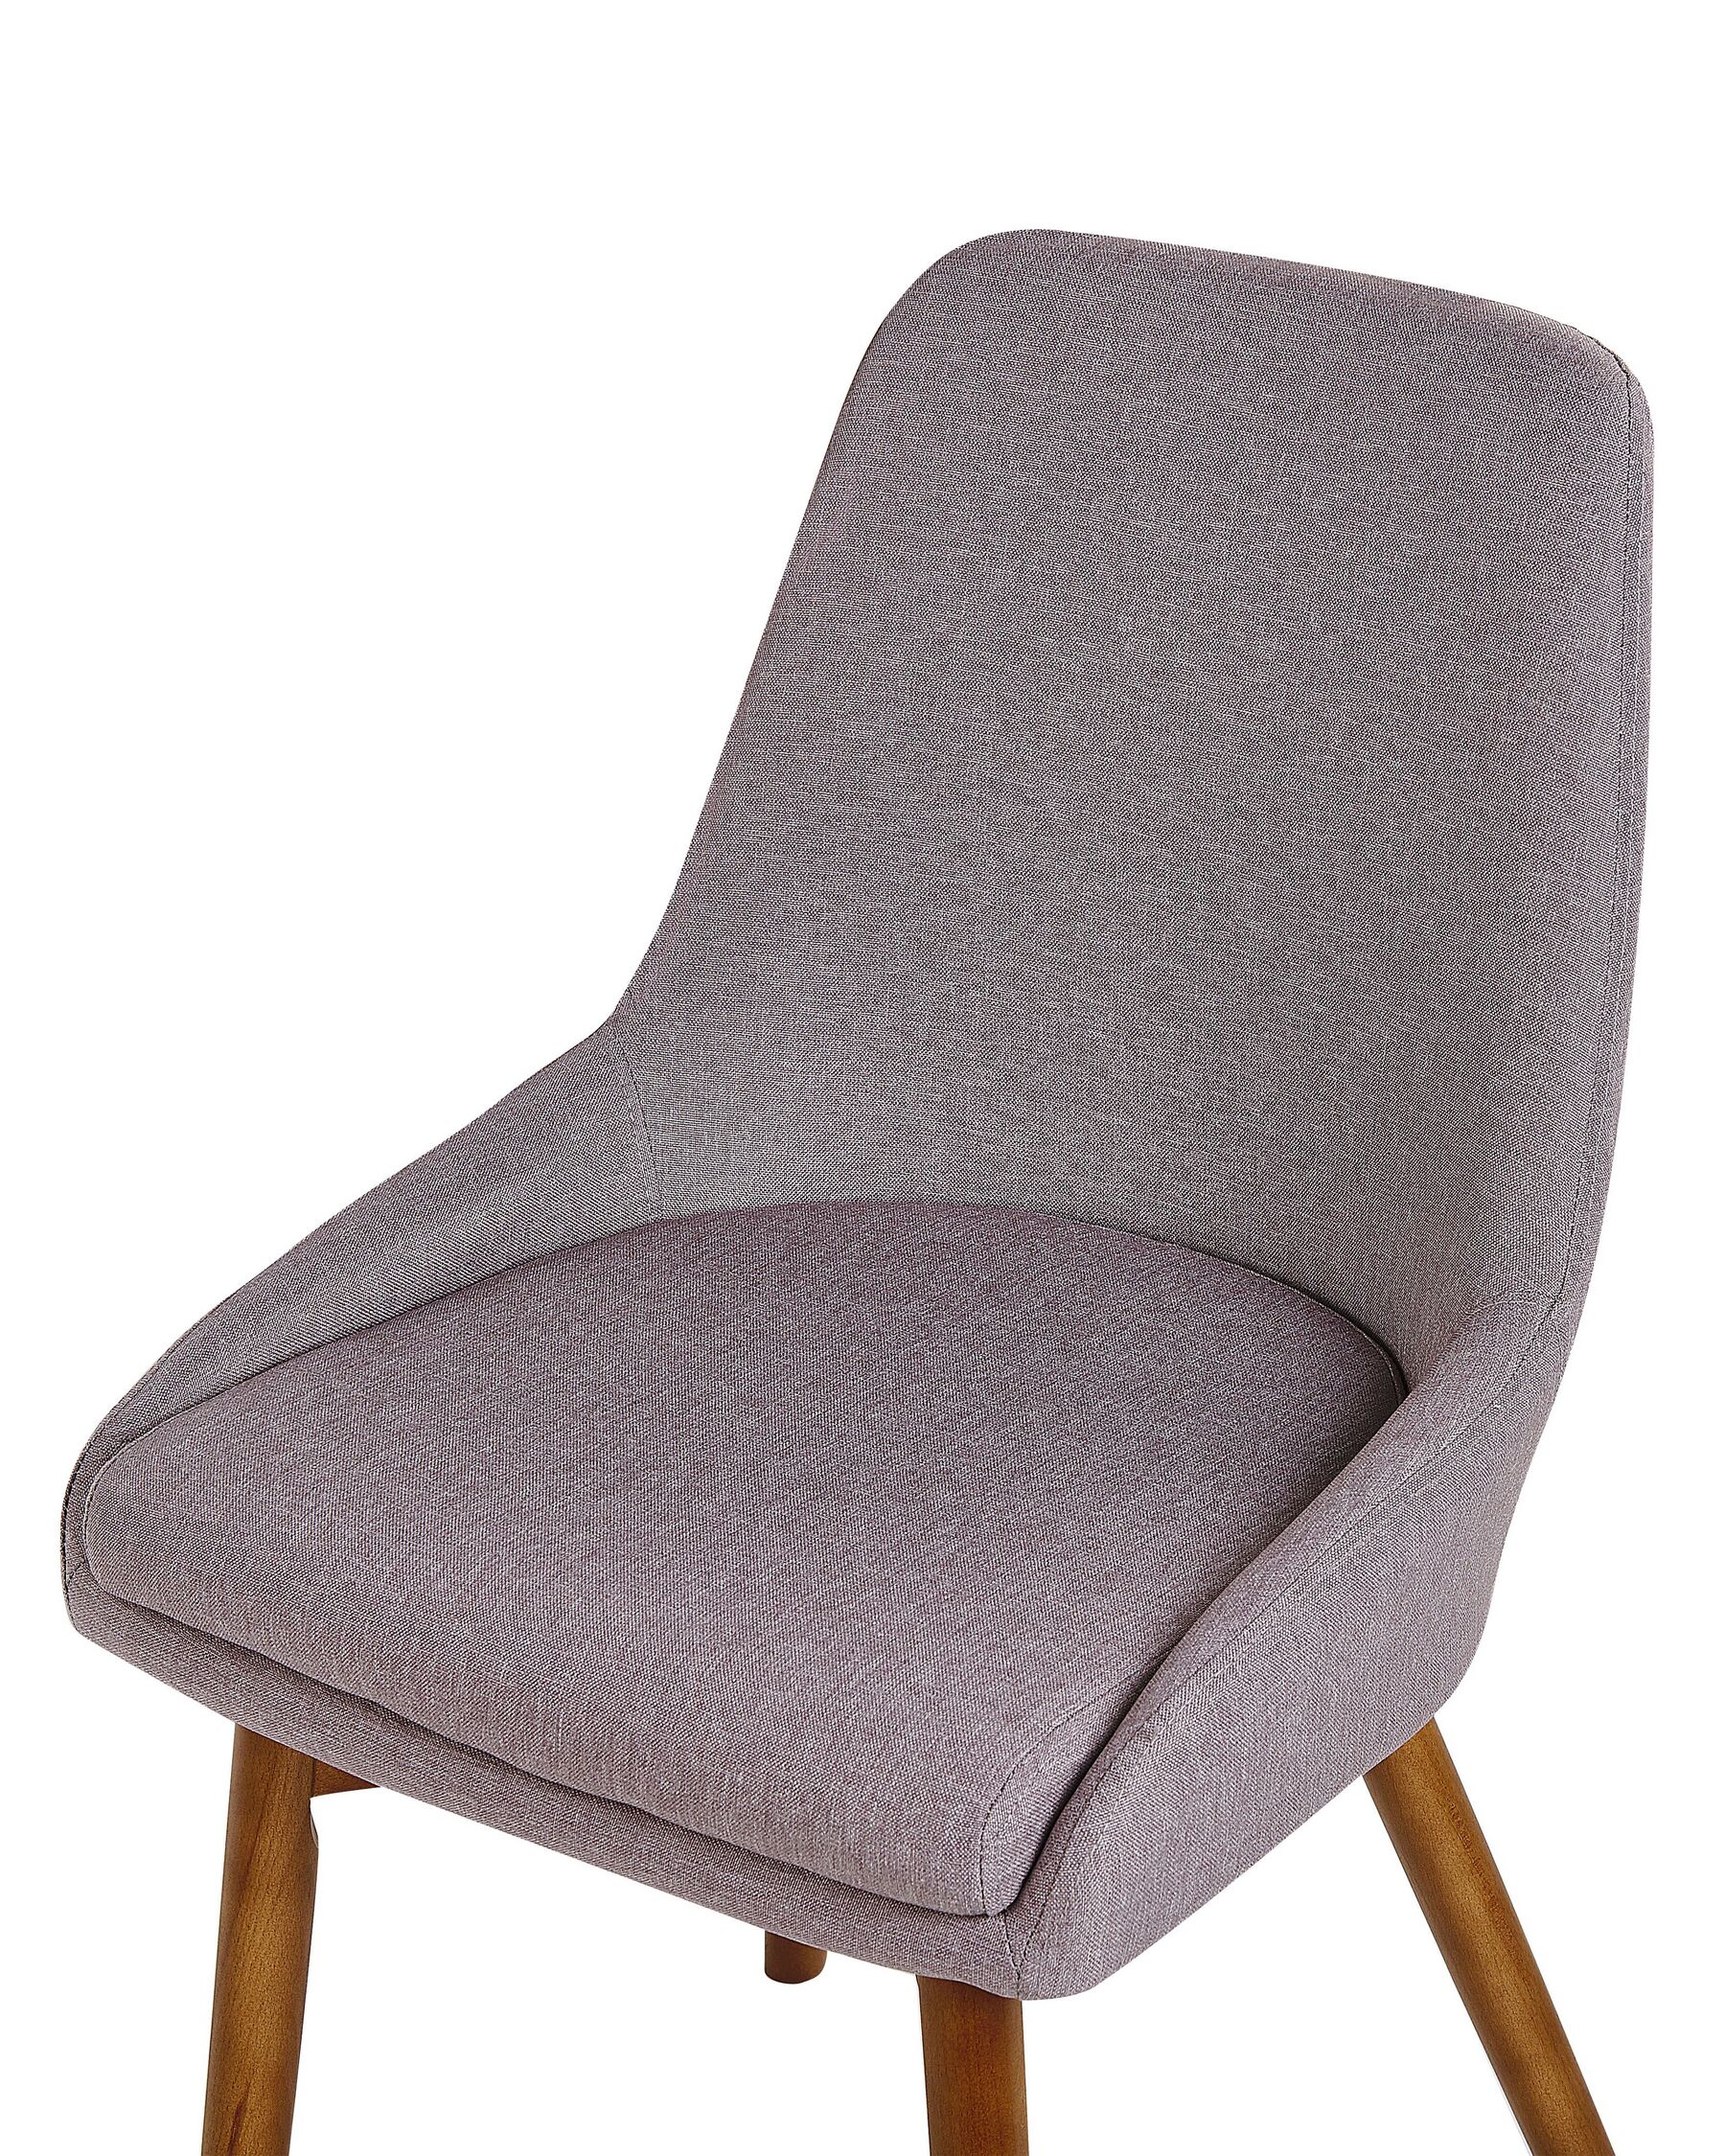 Set of 2 Fabric Dining Chairs Taupe MELFORT | Beliani.co.uk